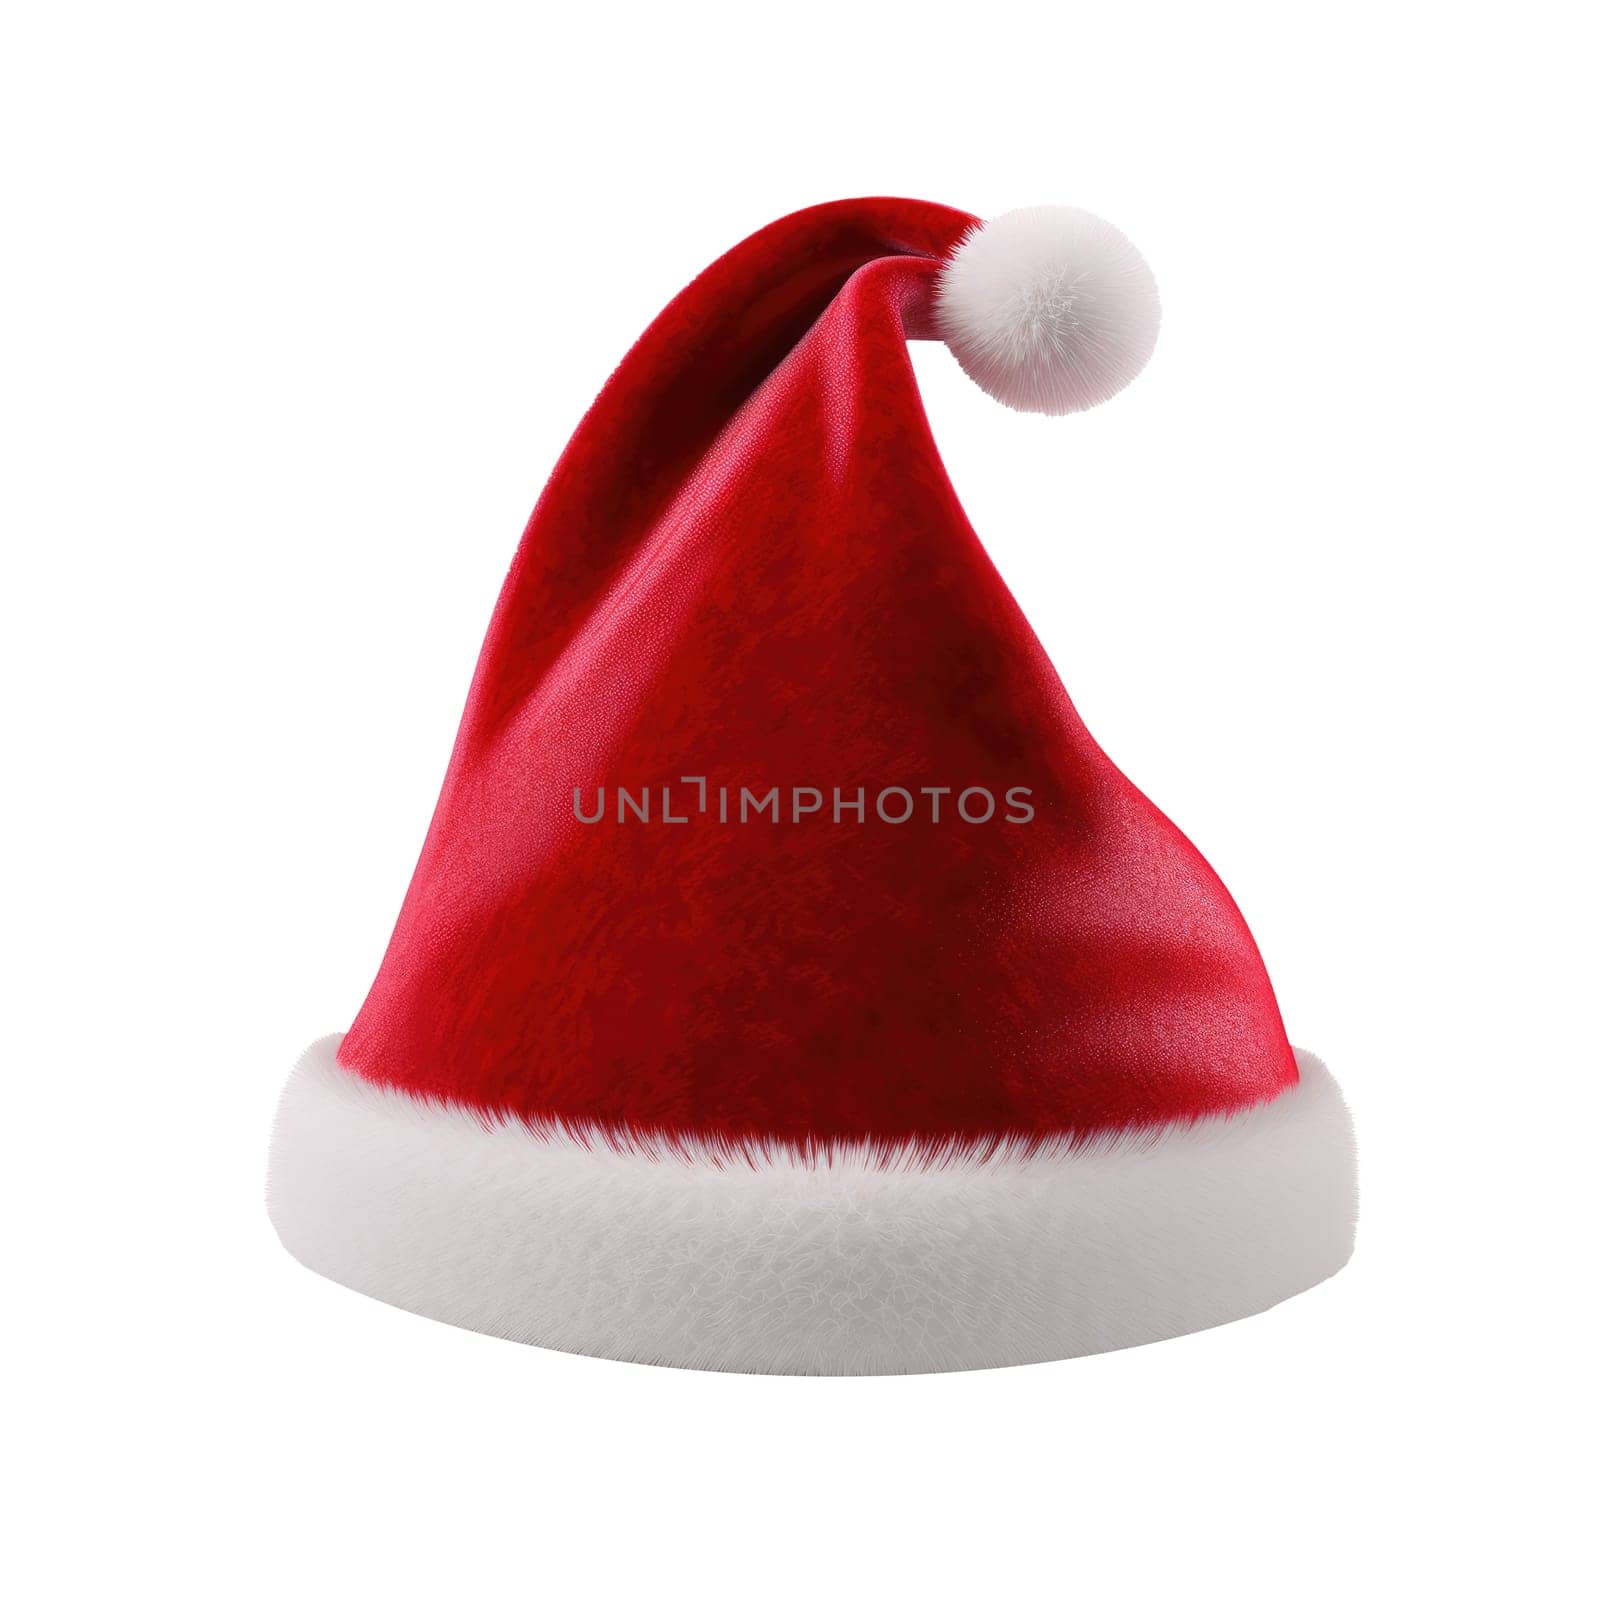 Single Santa Claus red hat isolated on white background by natali_brill